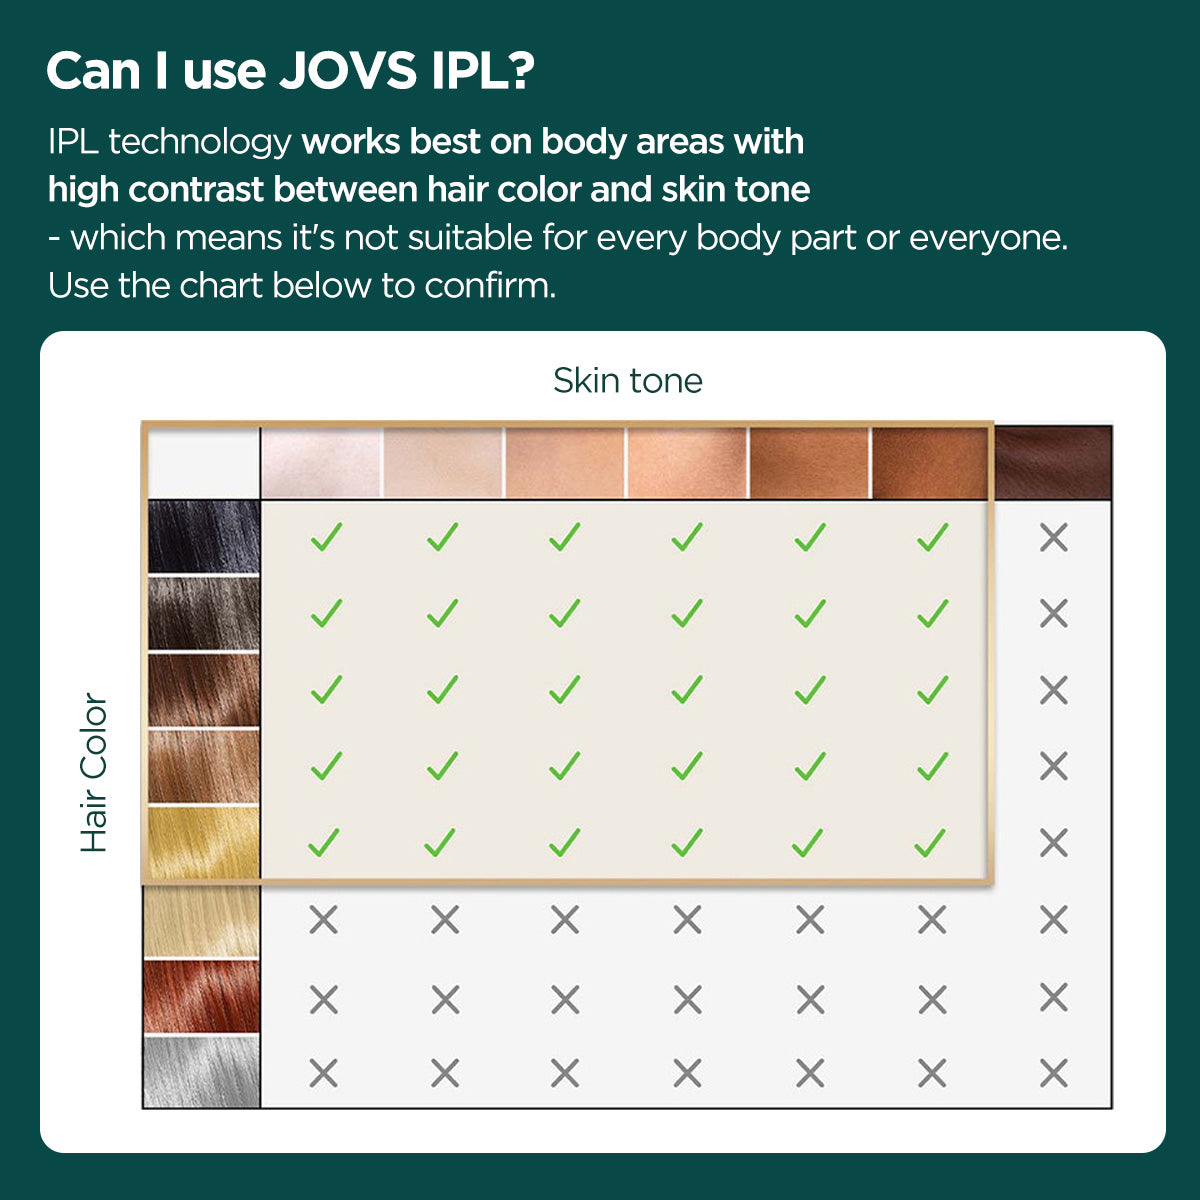 JOVS IPL Suitability Chart displaying compatible seven skin tones and eight hair colors for effective IPL hair removal.